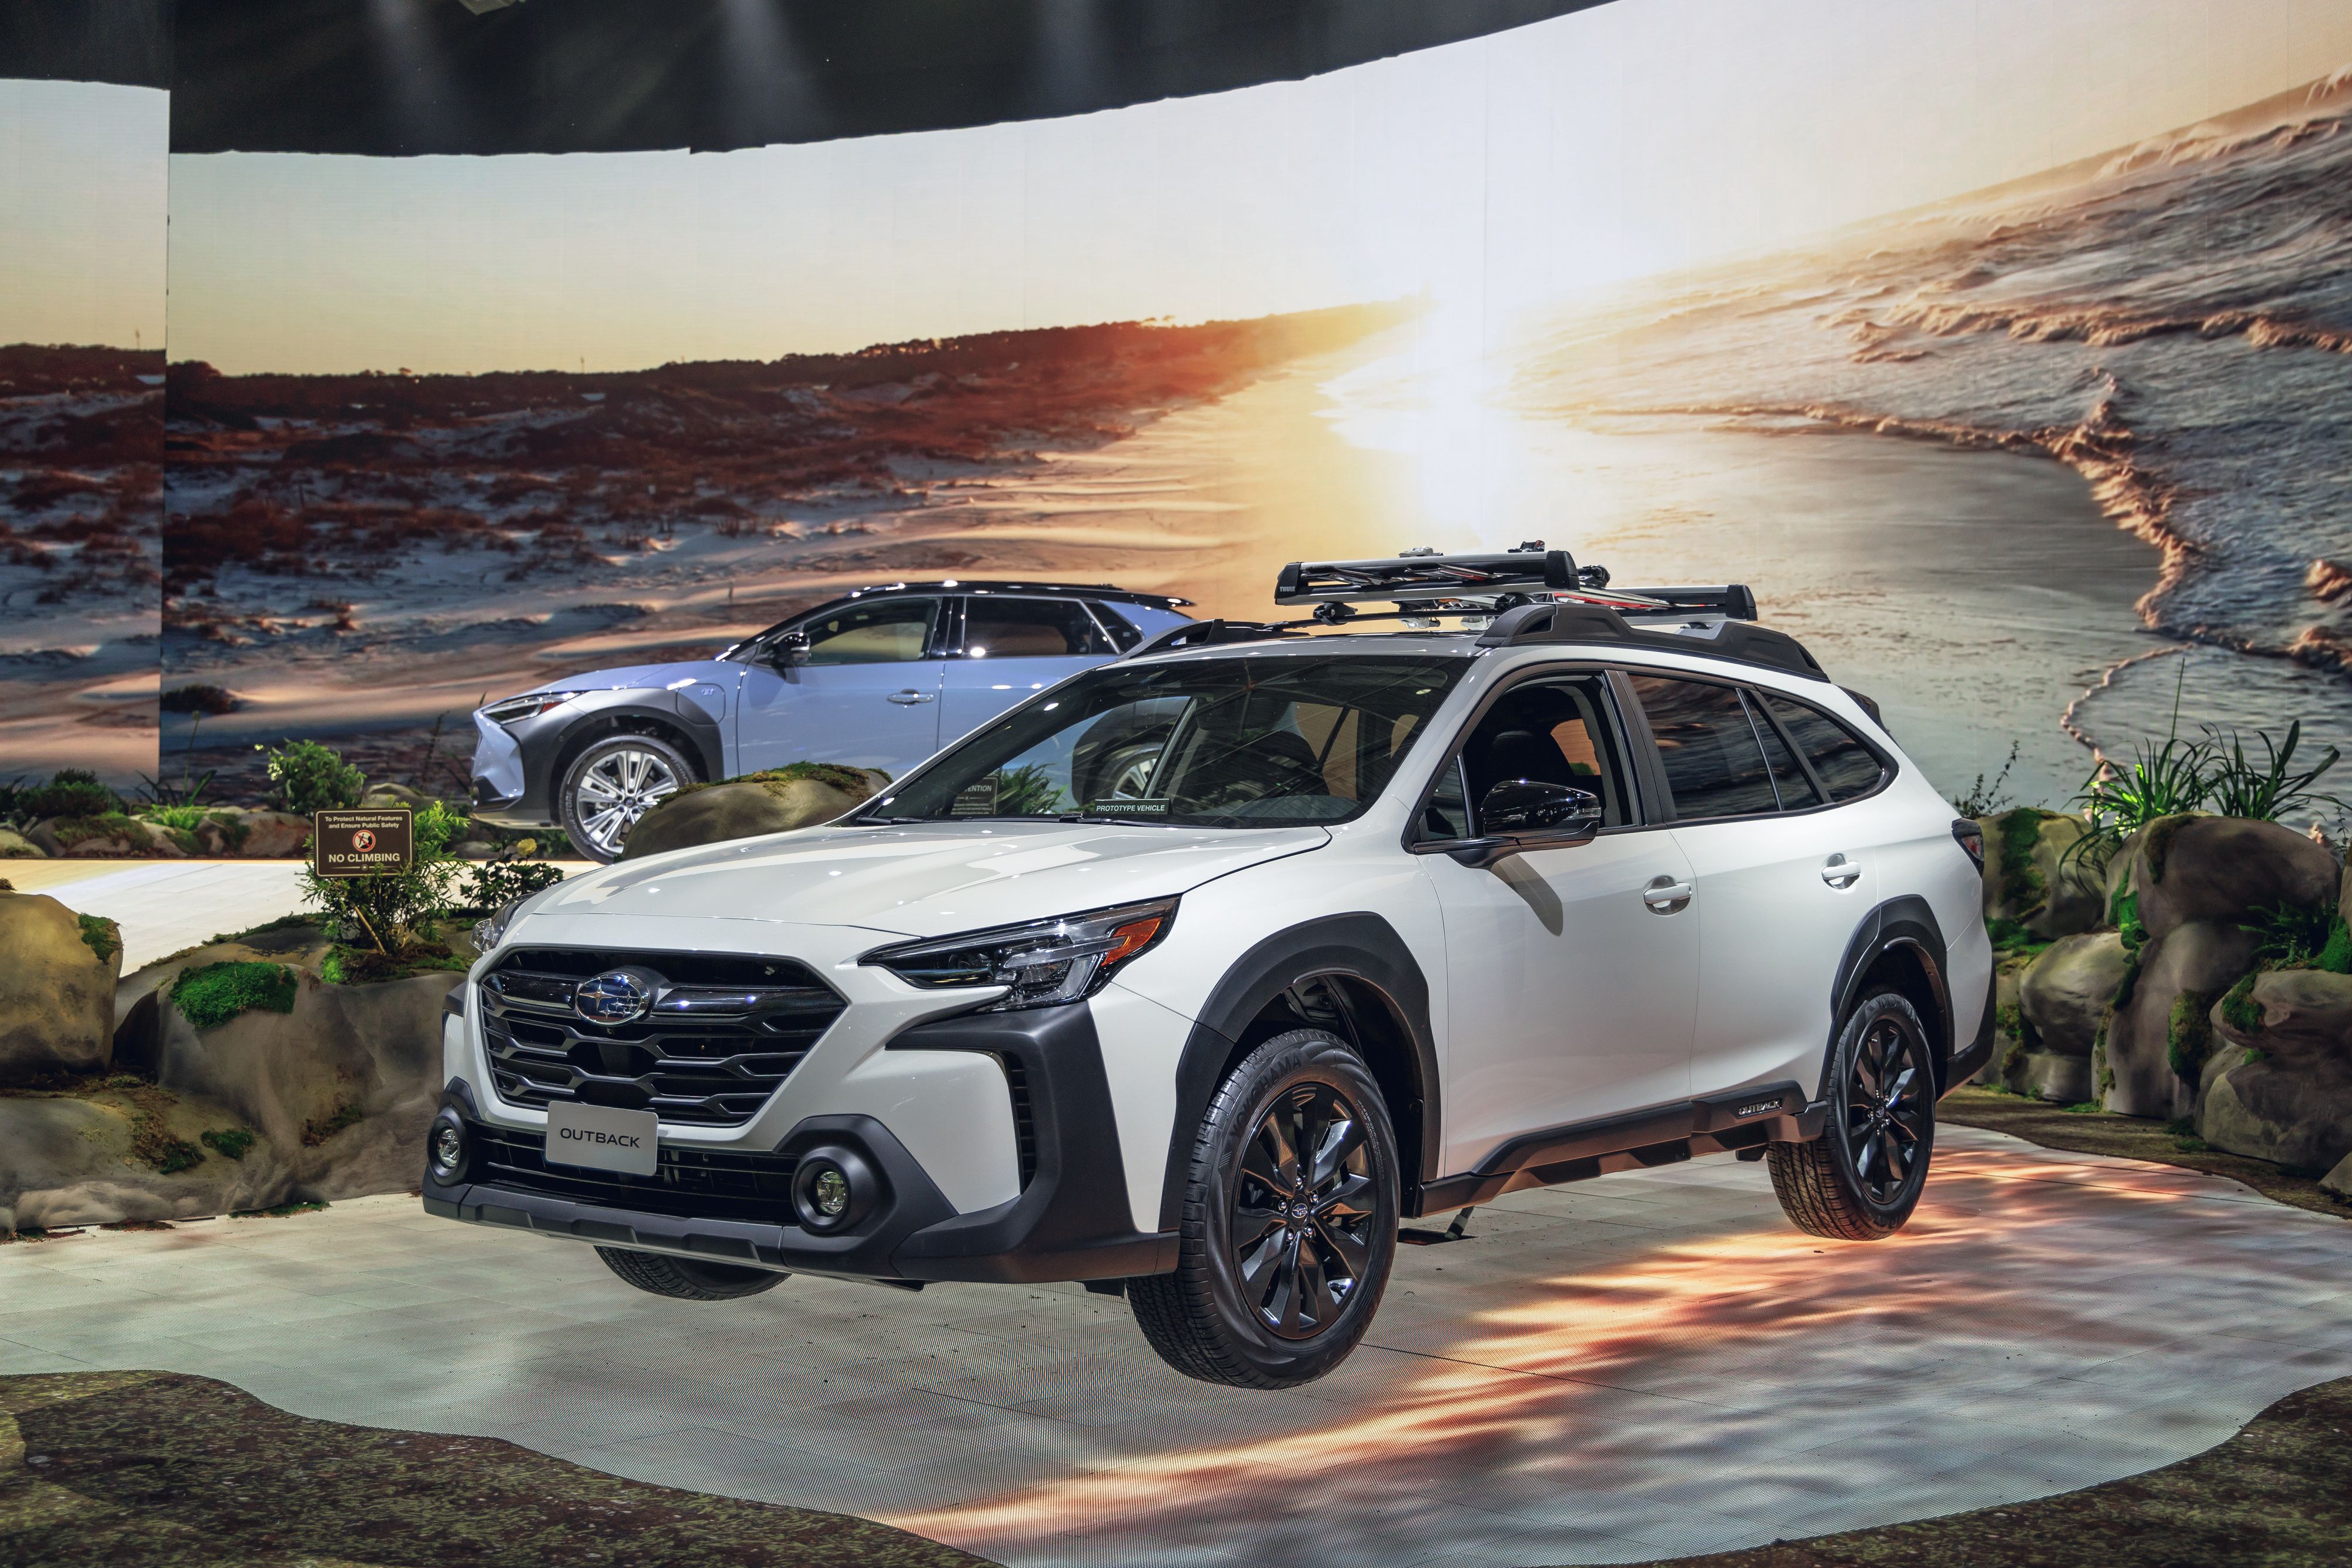 Outback 2023 Touring Concept